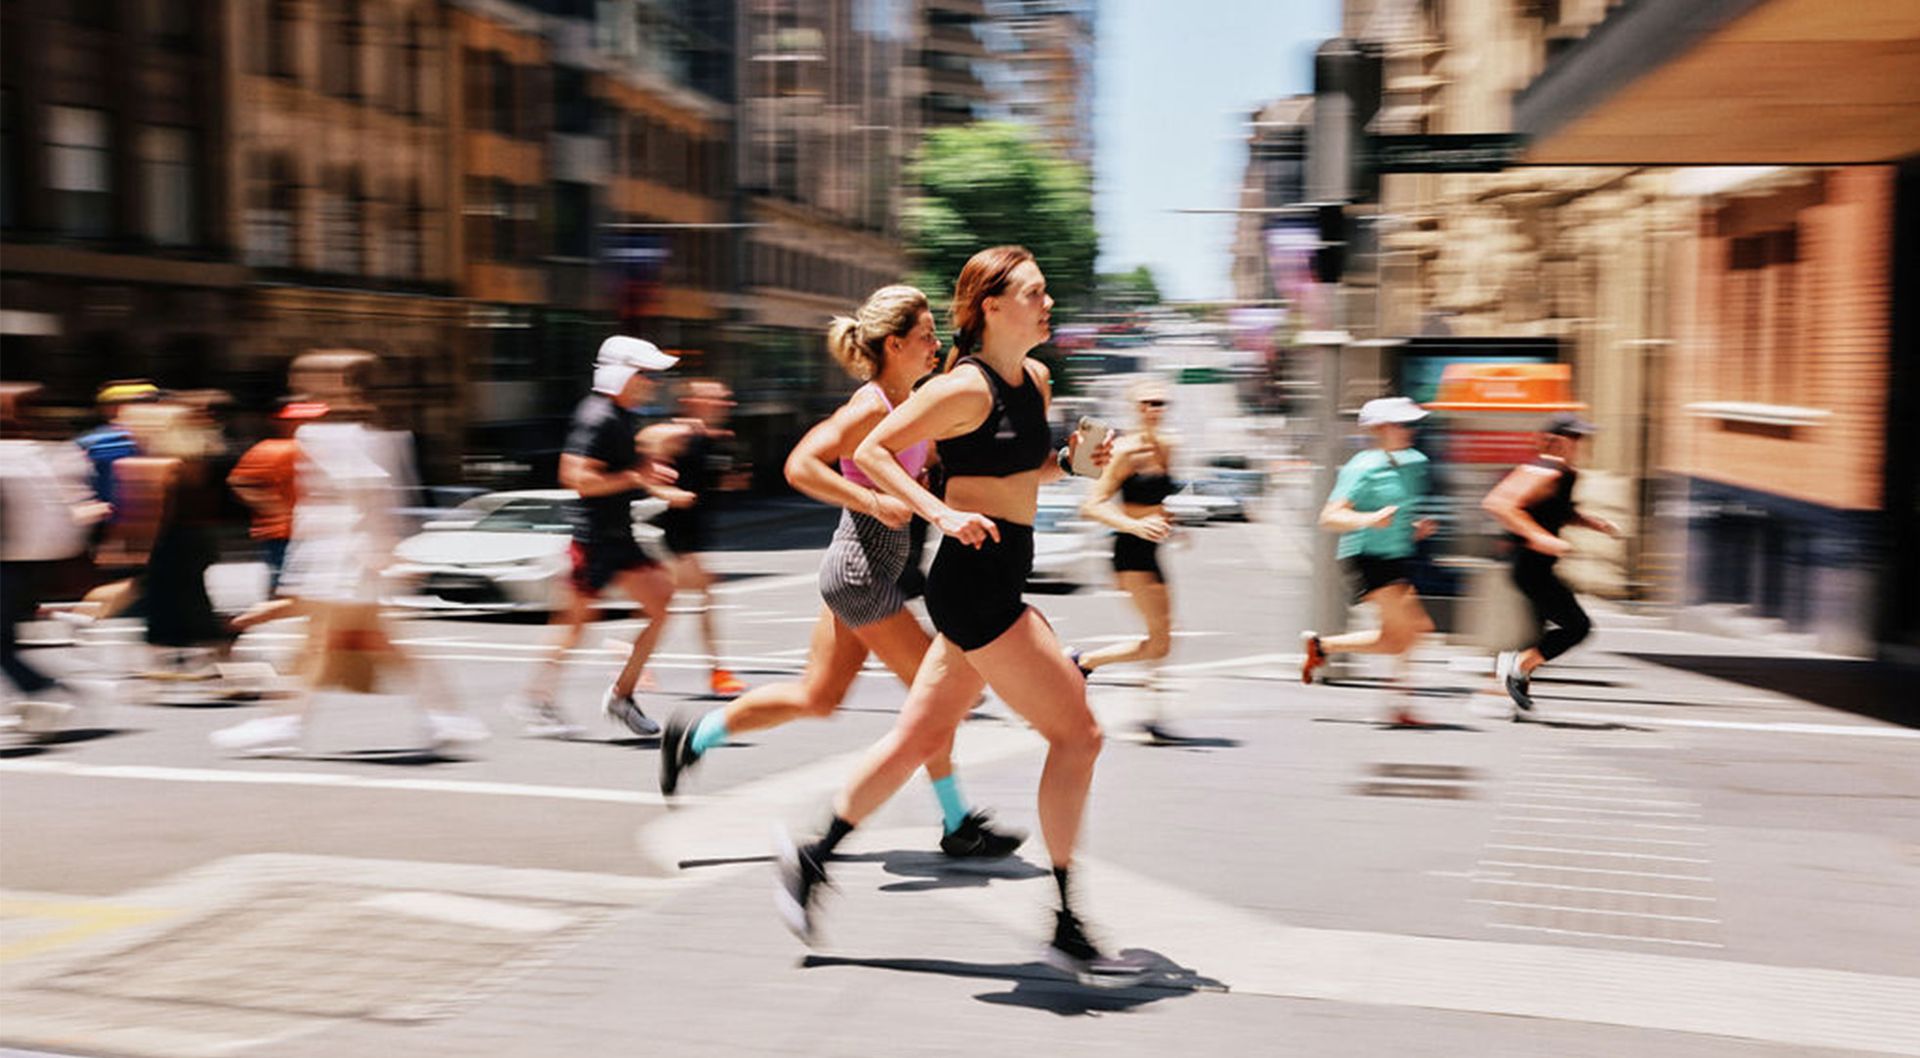 Runners moving in fast sequence image through Sydney CBD.